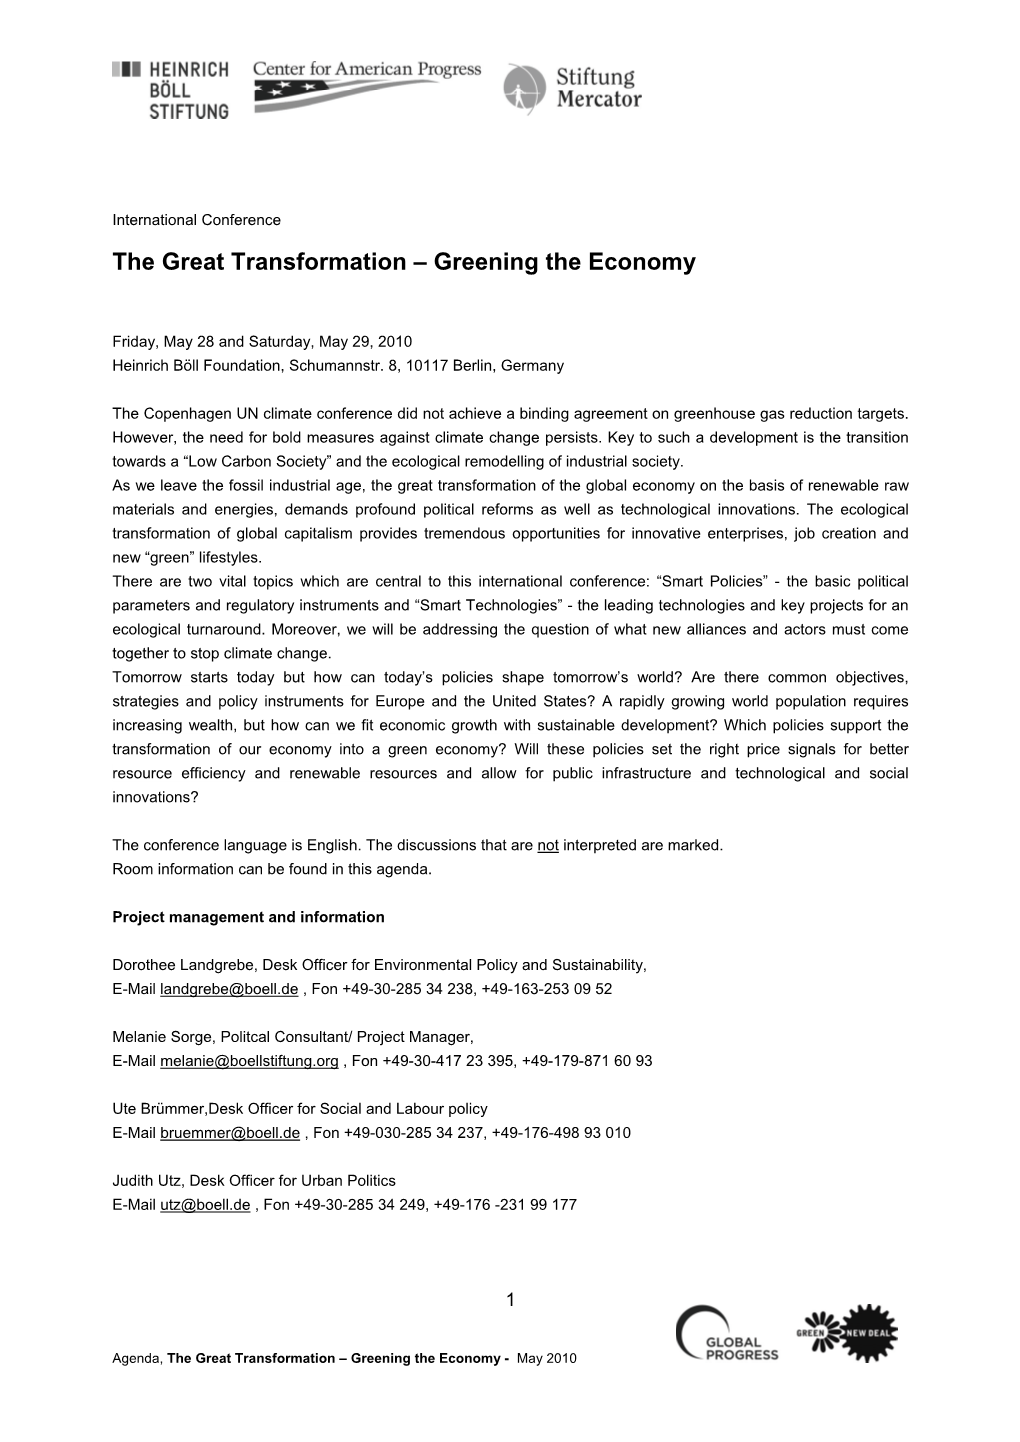 The Great Transformation – Greening the Economy